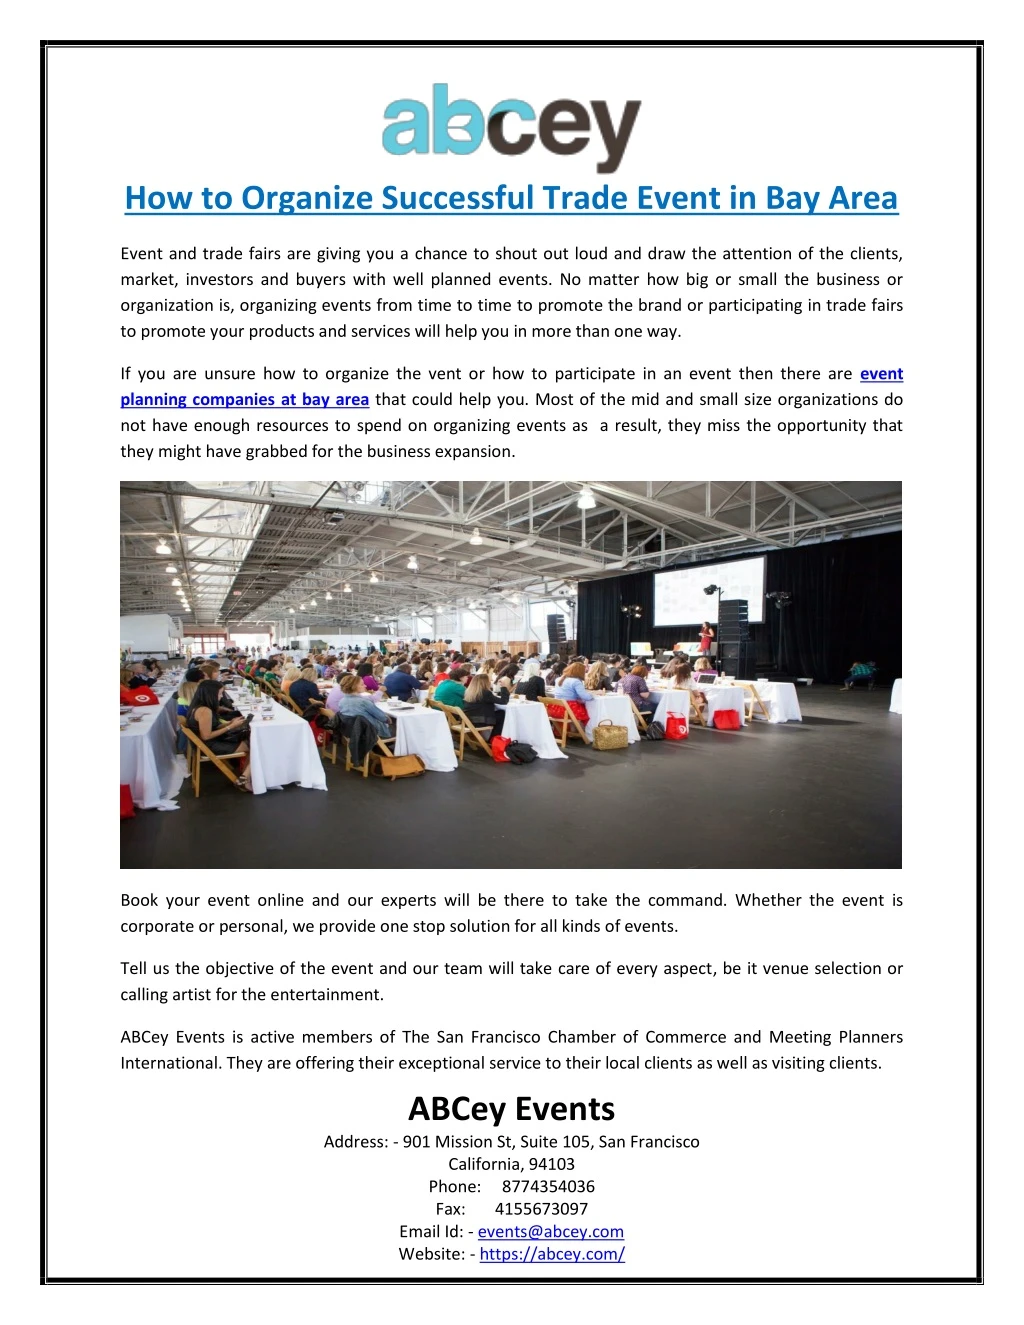 how to organize successful trade event in bay area